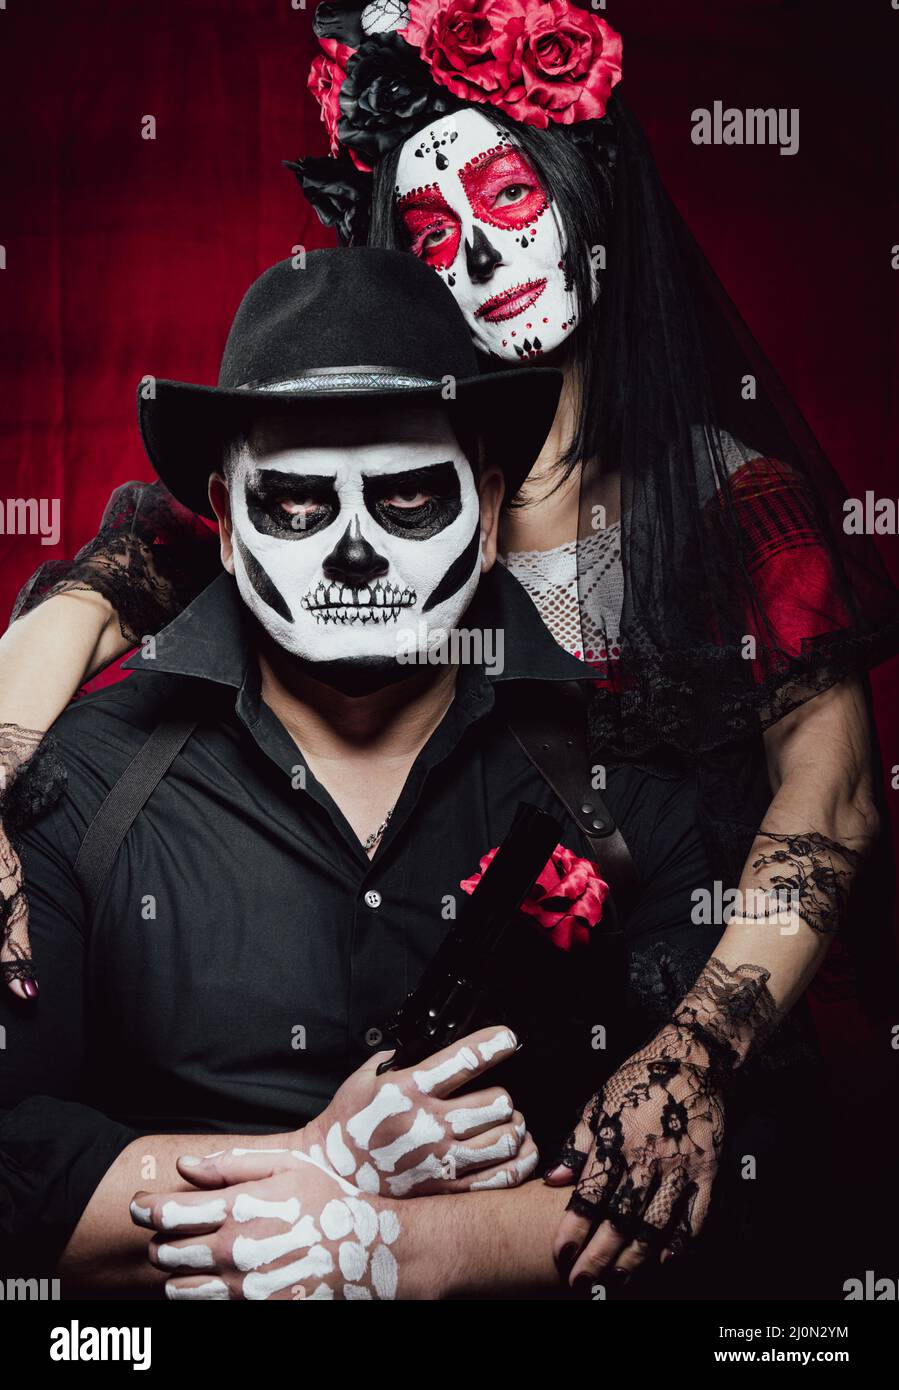 Beautiful woman with a sugar skull makeup with a wreath of flowers on her head and a skeleton man in a black hat holding a gun Stock Photo